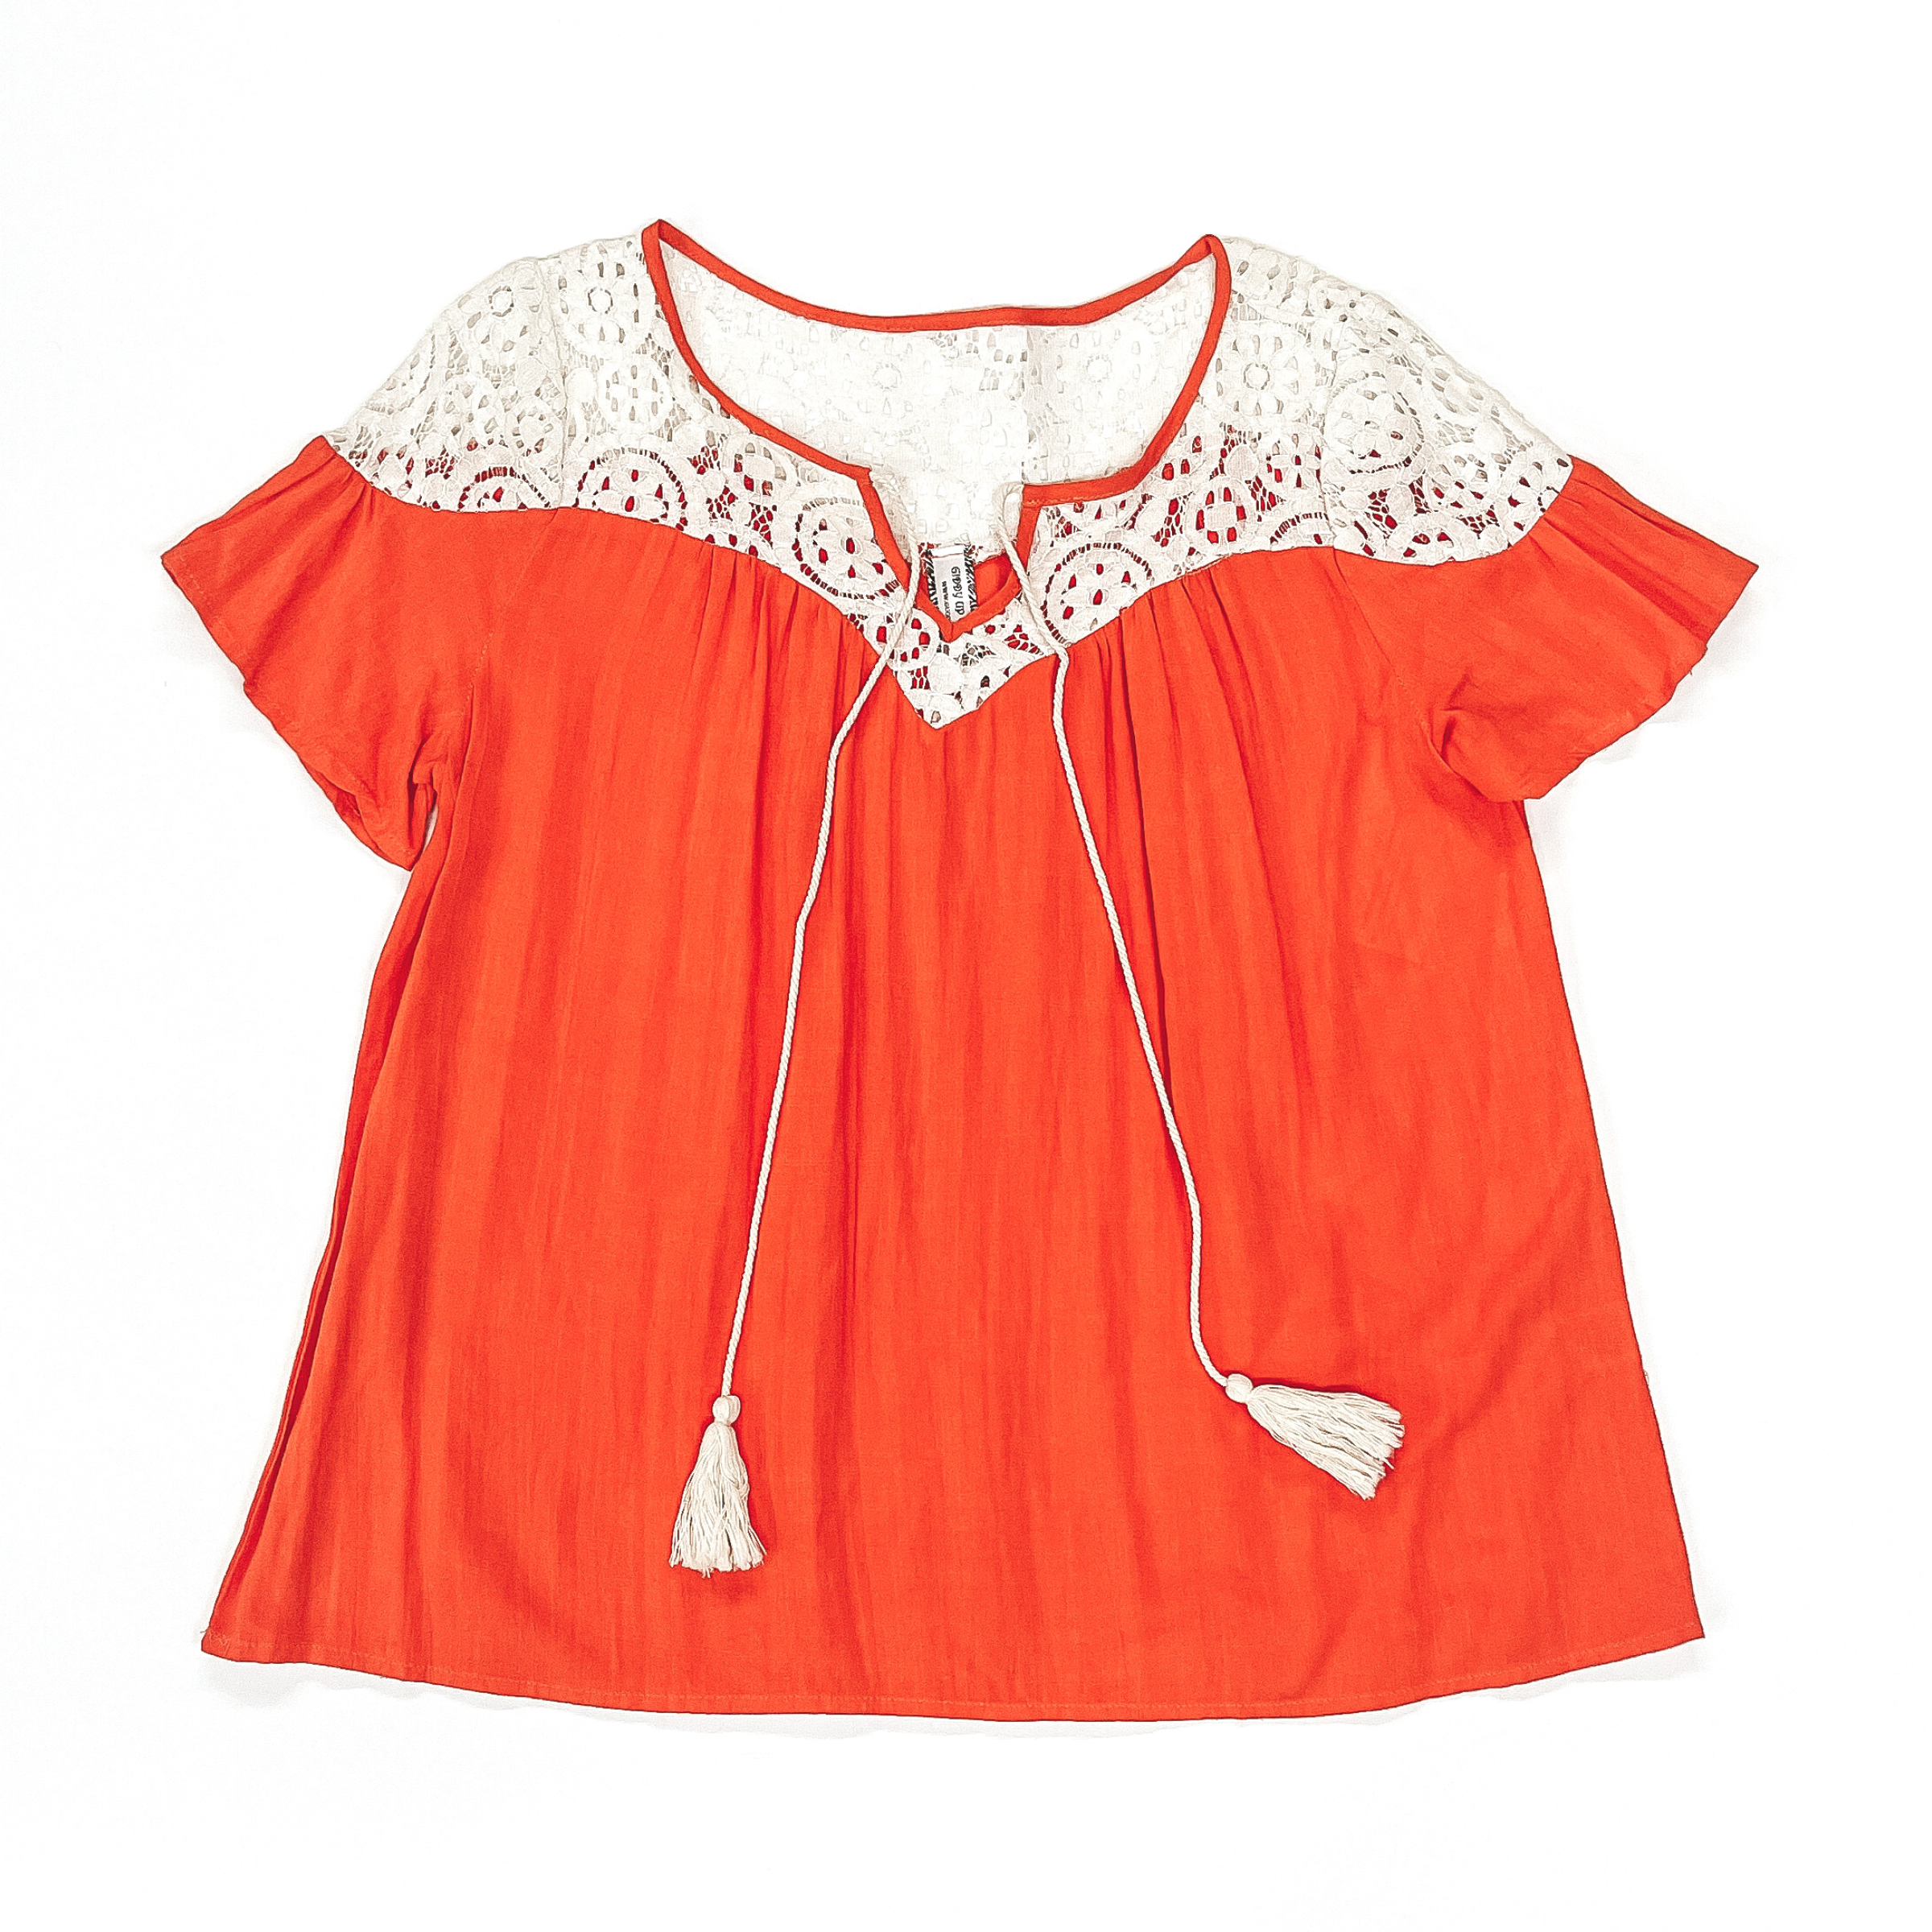 Orange Short Sleeve Top with Ivory Lace and Tassels - Giddy Up Glamour Boutique